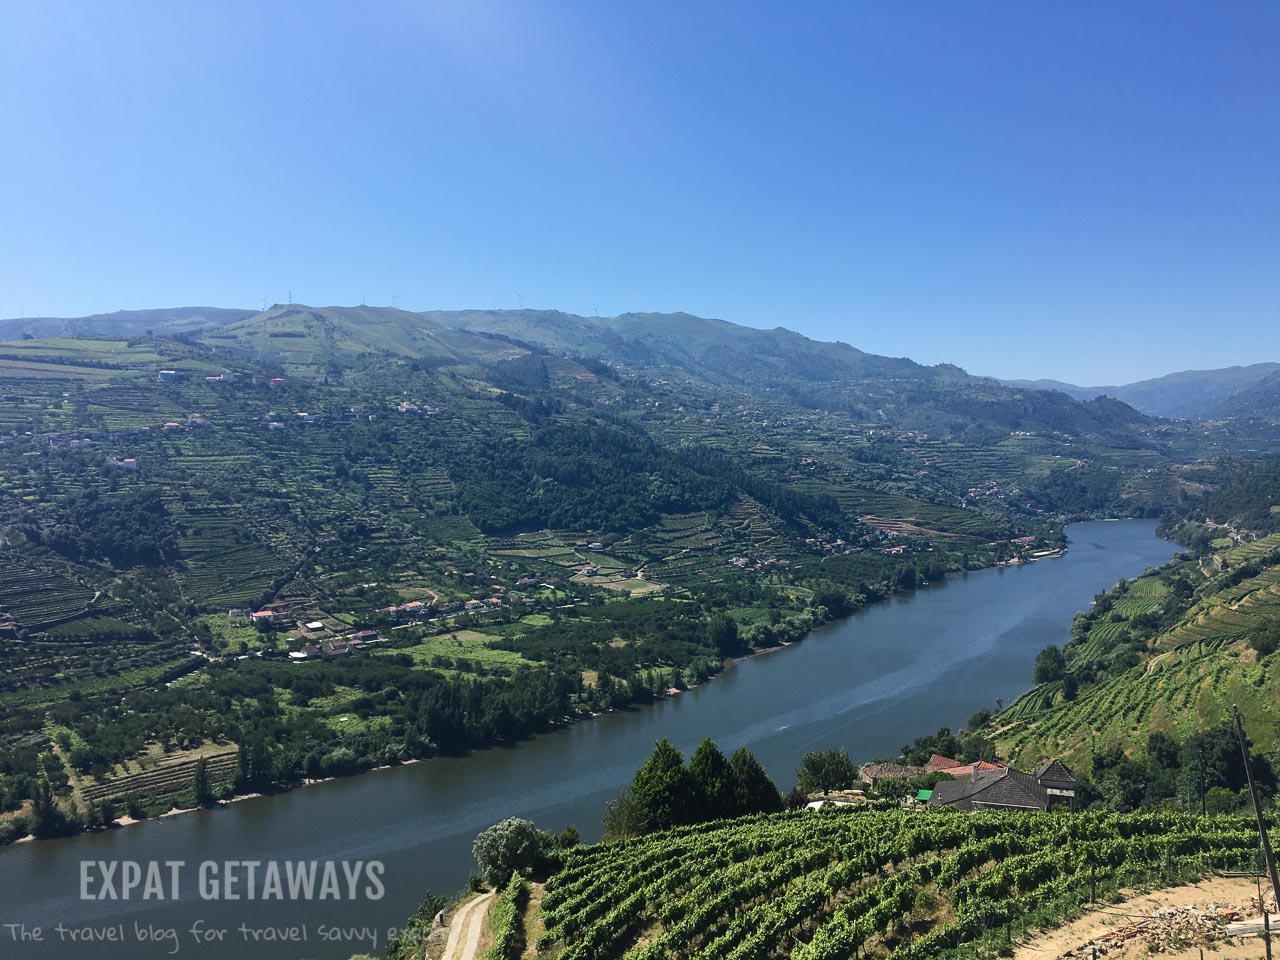 With scenery like this it is hard not to fall in love with the Douro Valley, Portugal. The amazing port is an added bonus!